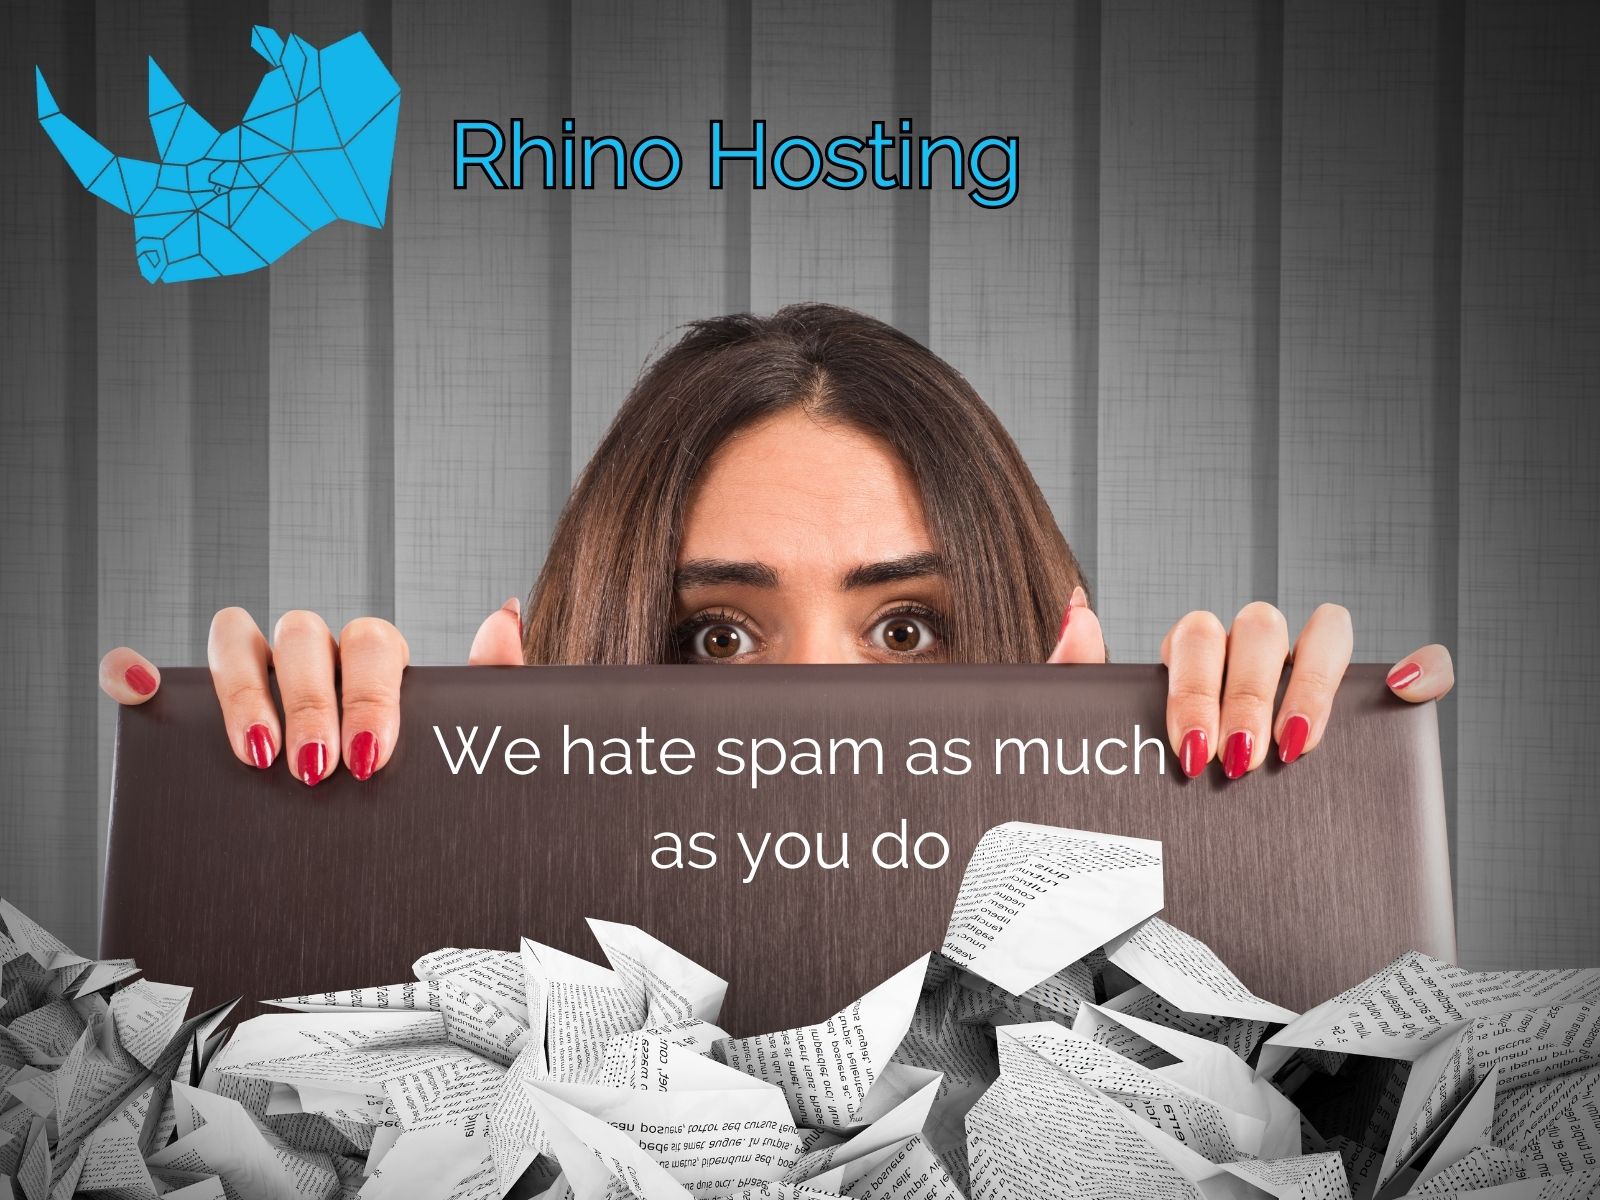 We all hate spam